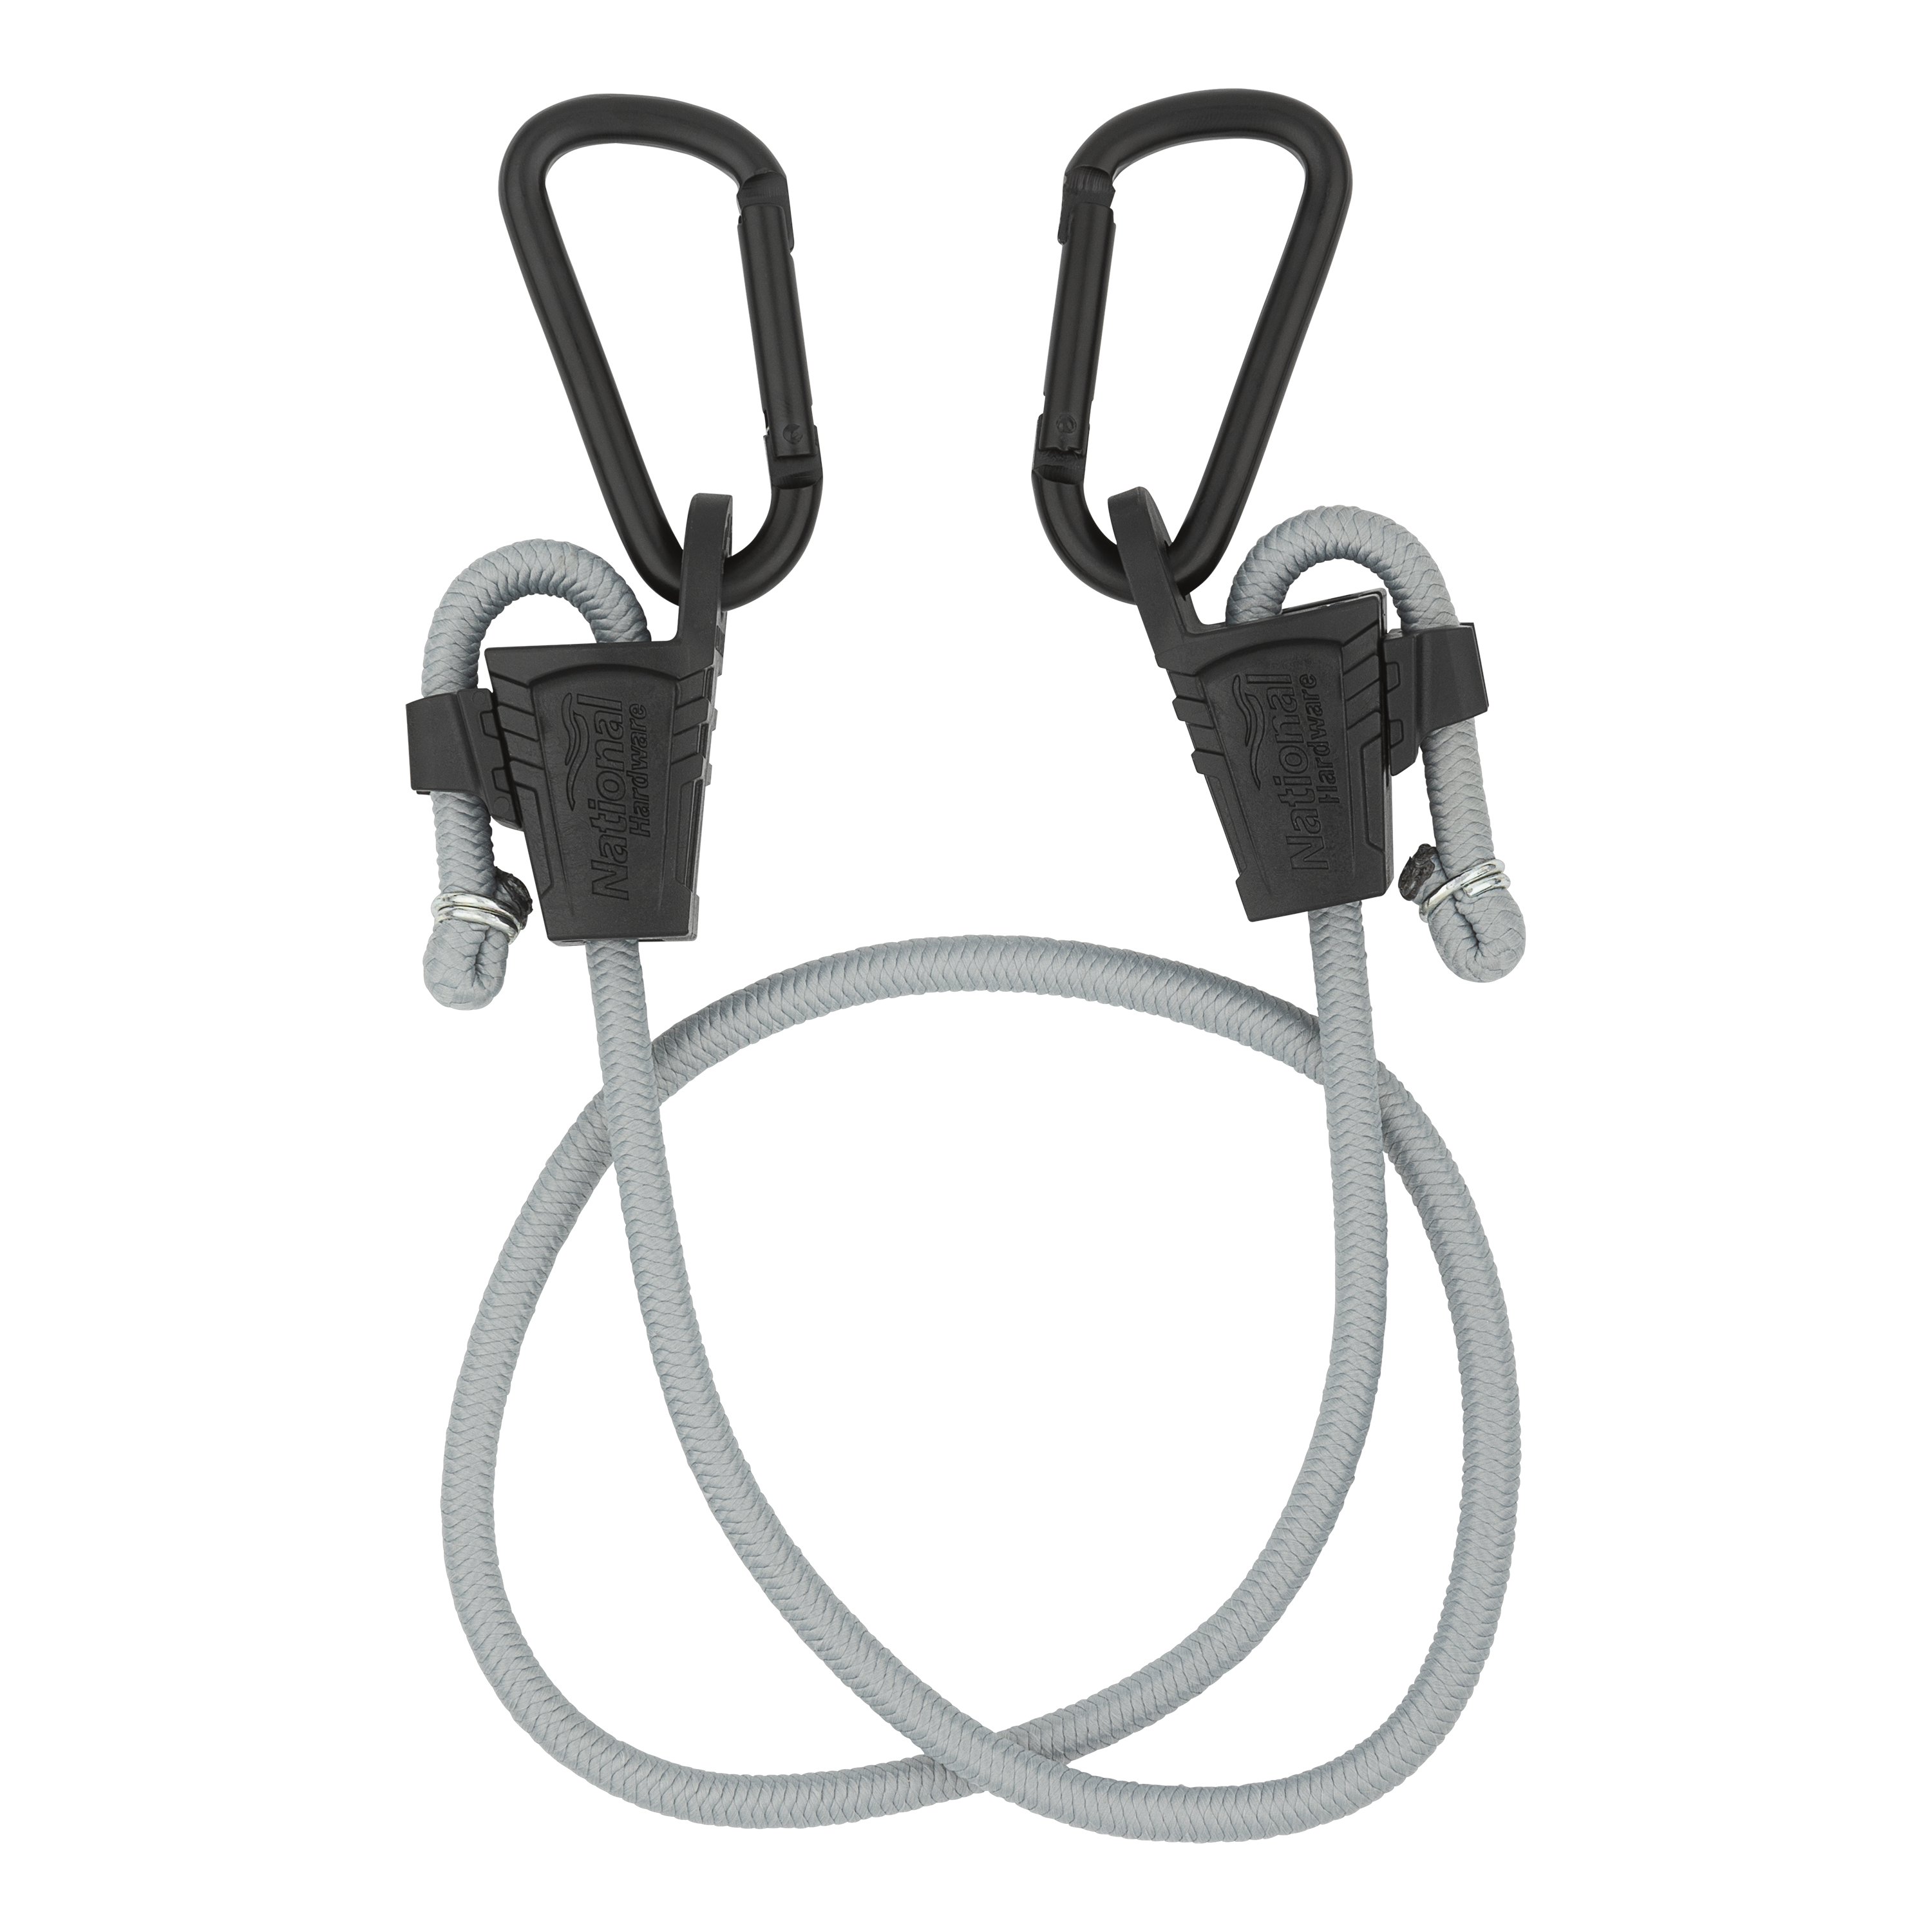 Onegee Bungee: An Adjustable Bungee Cord